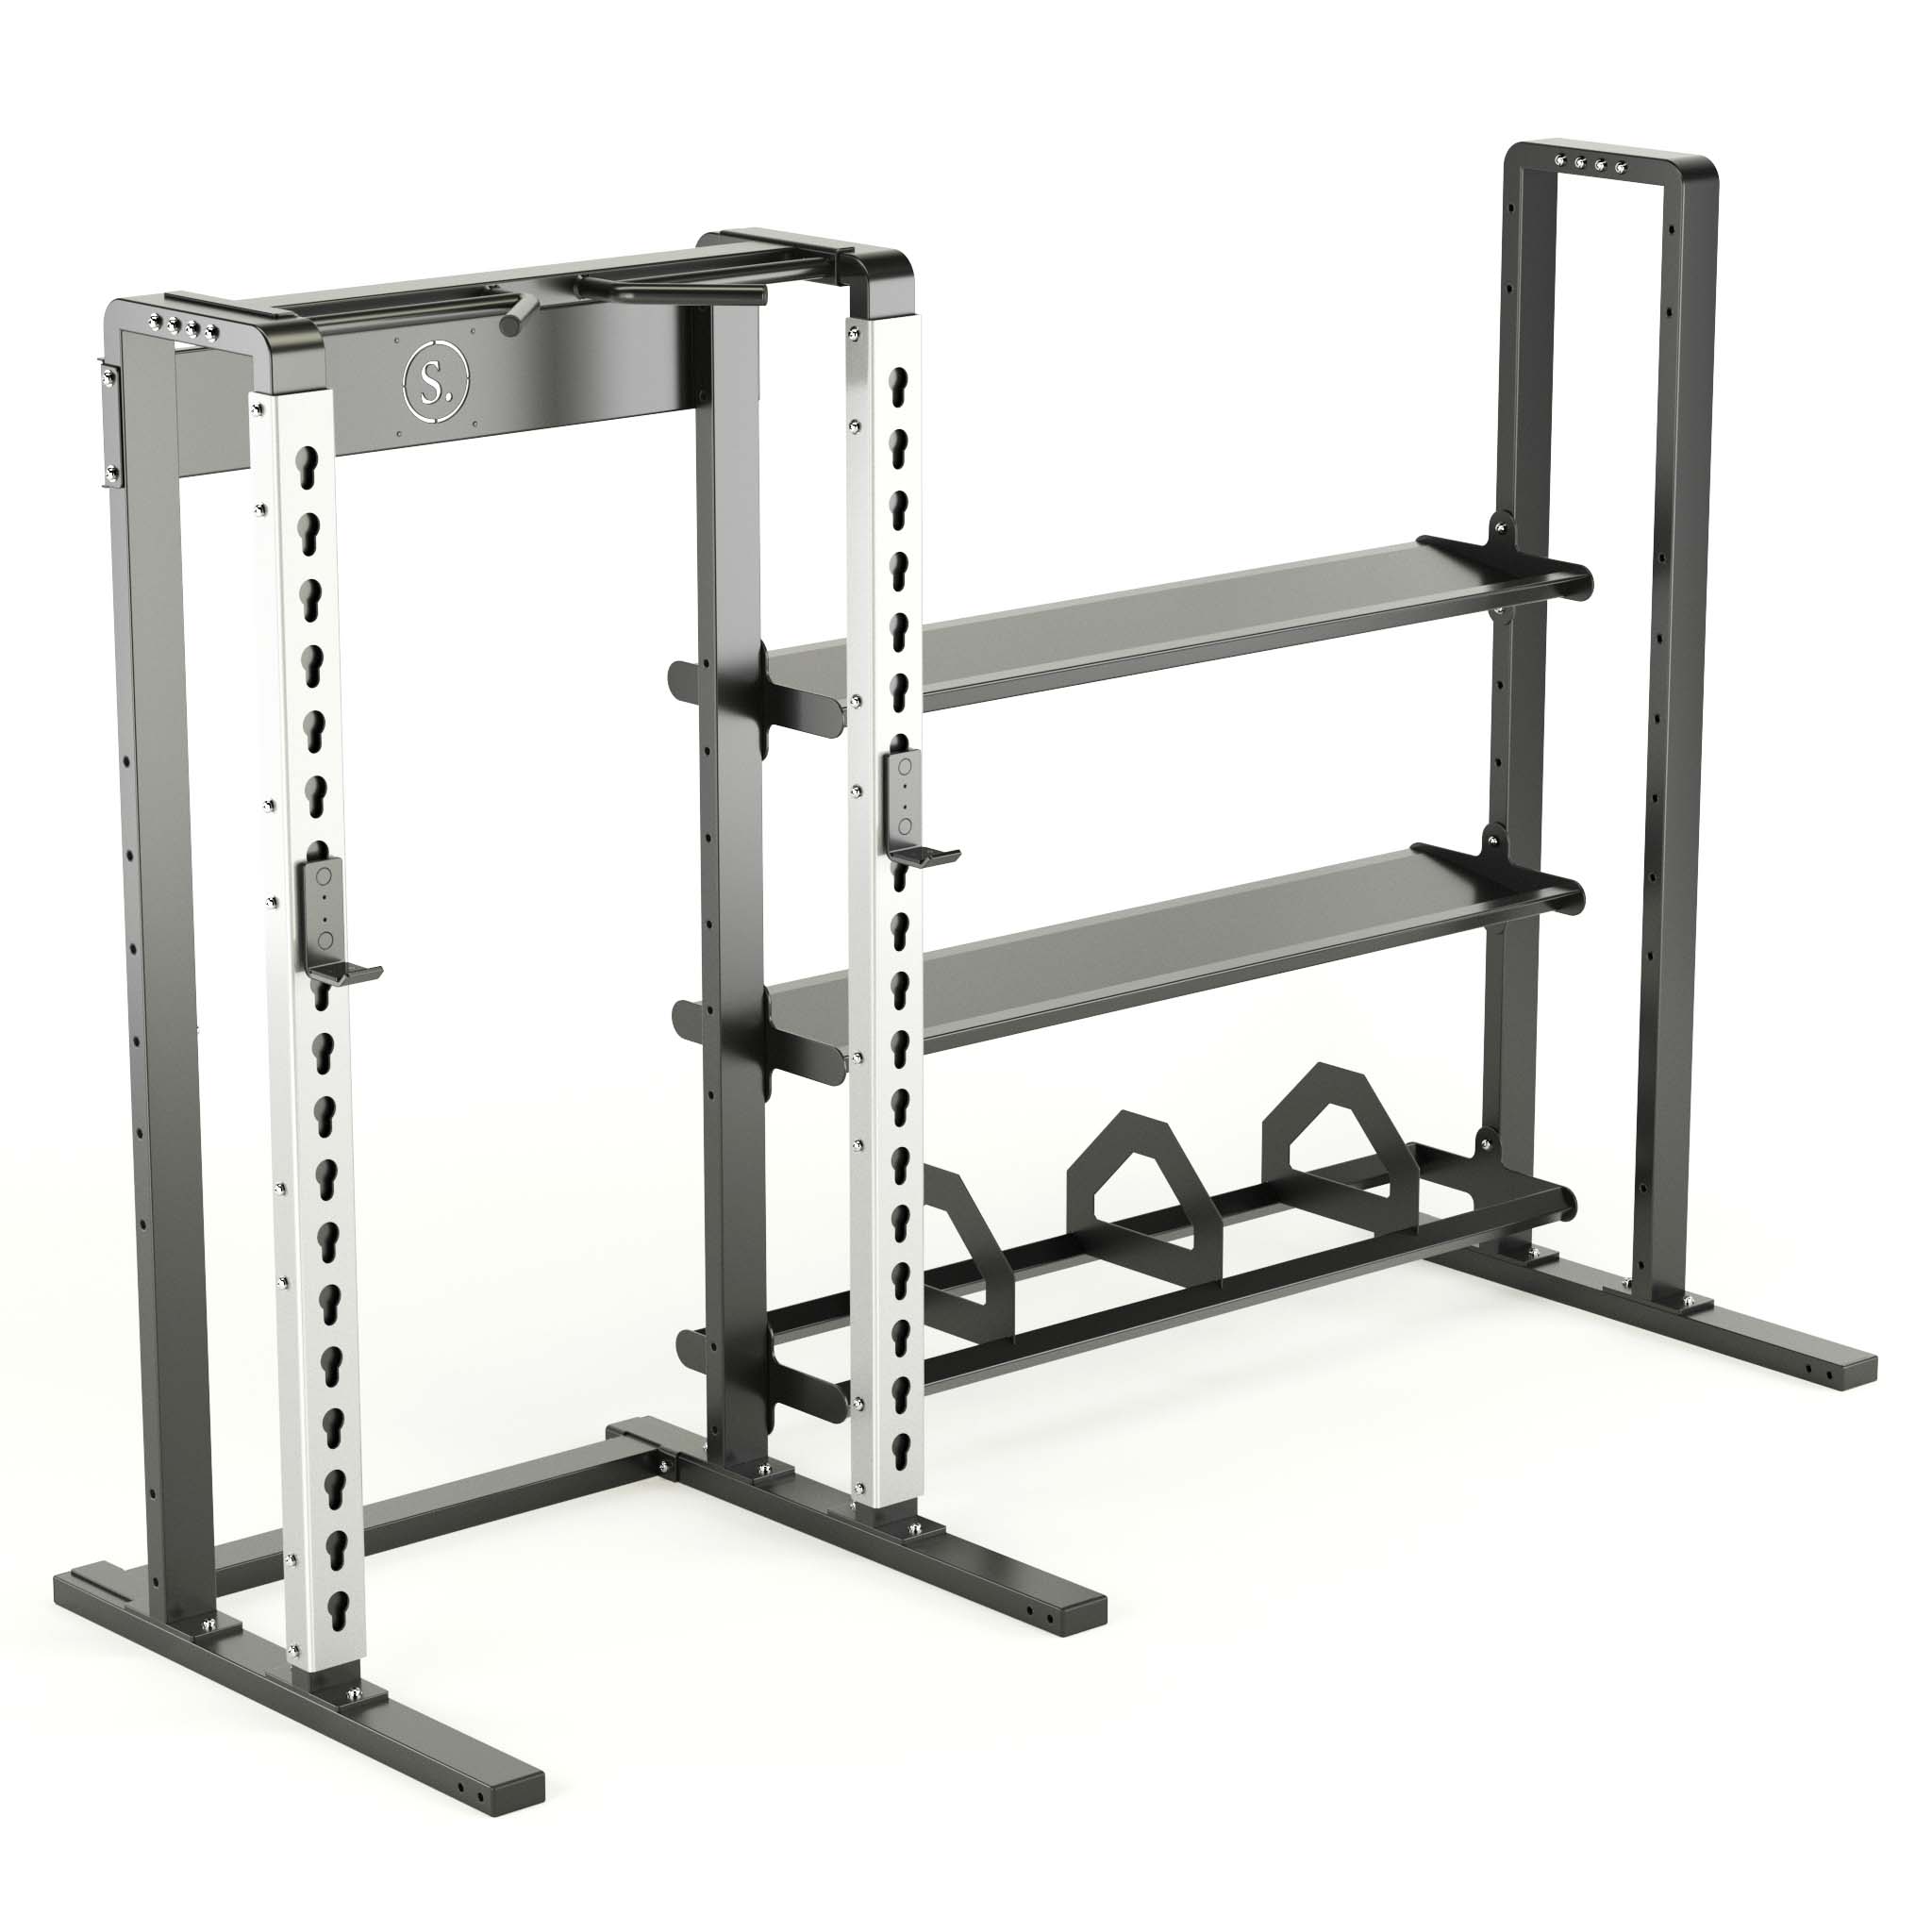 Solo half rack with wide storage in silver